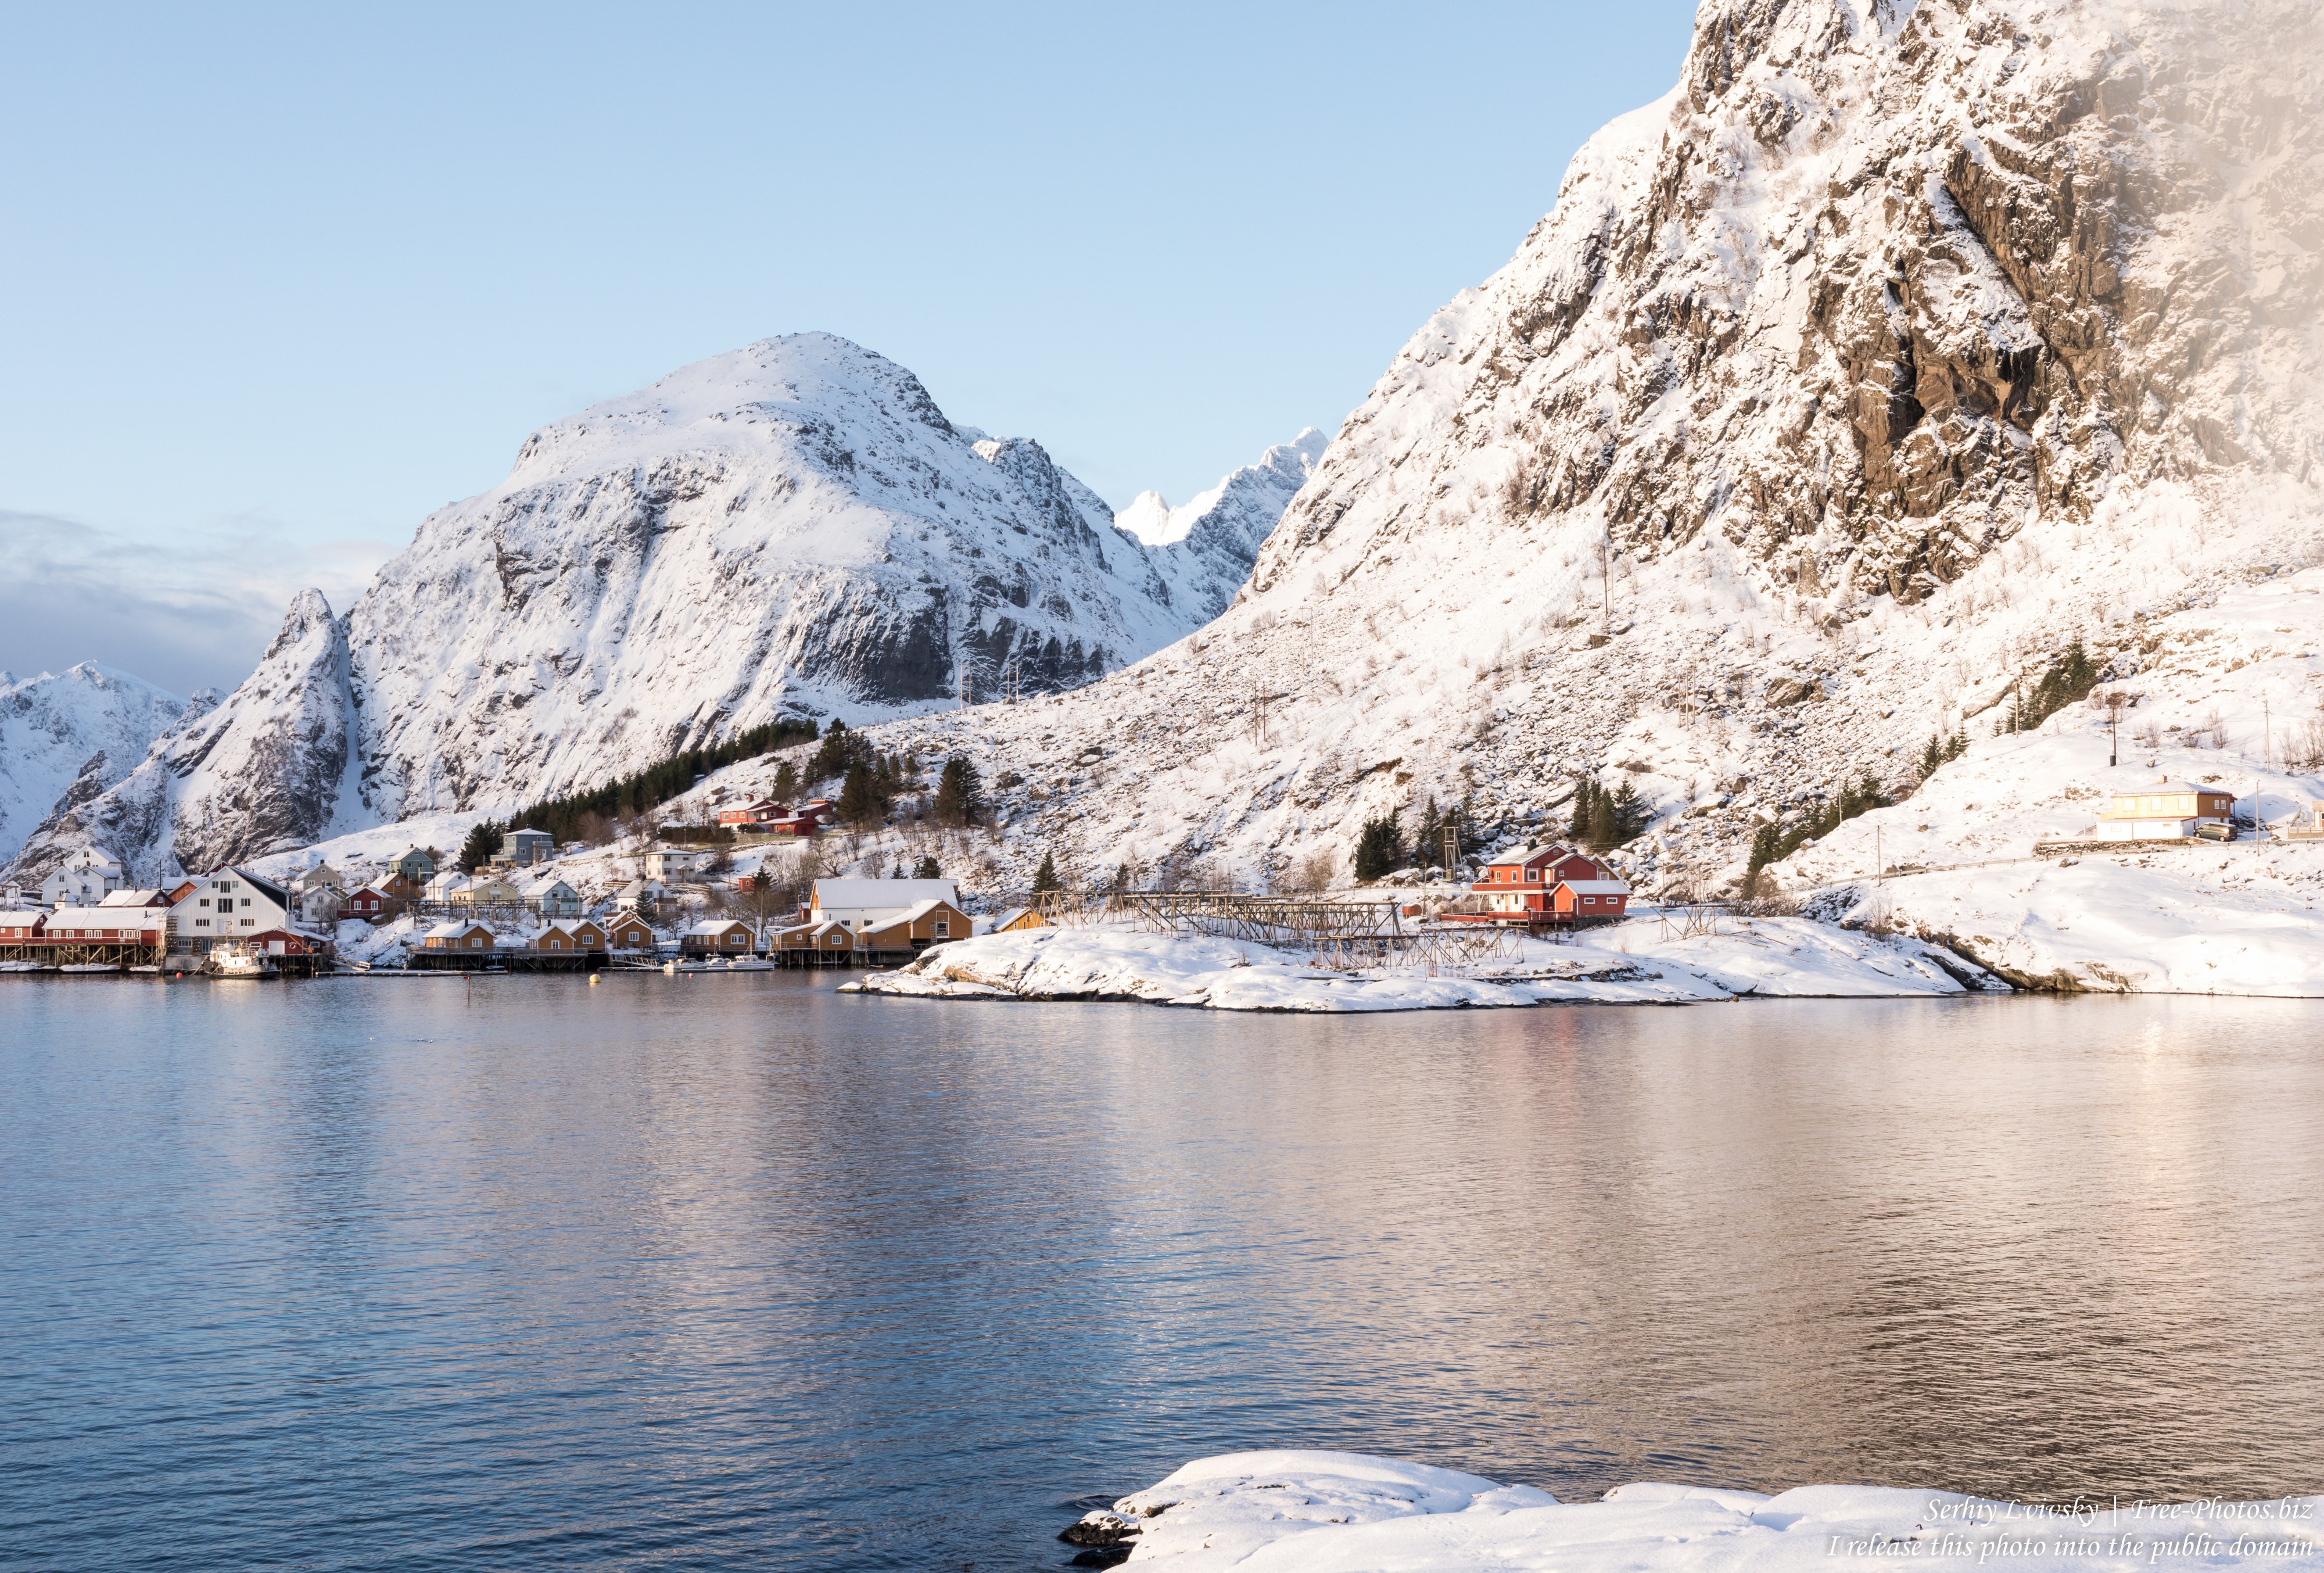 Å i Lofoten, Norway, in February 2020, photographed by Serhiy Lvivsky, picture 17